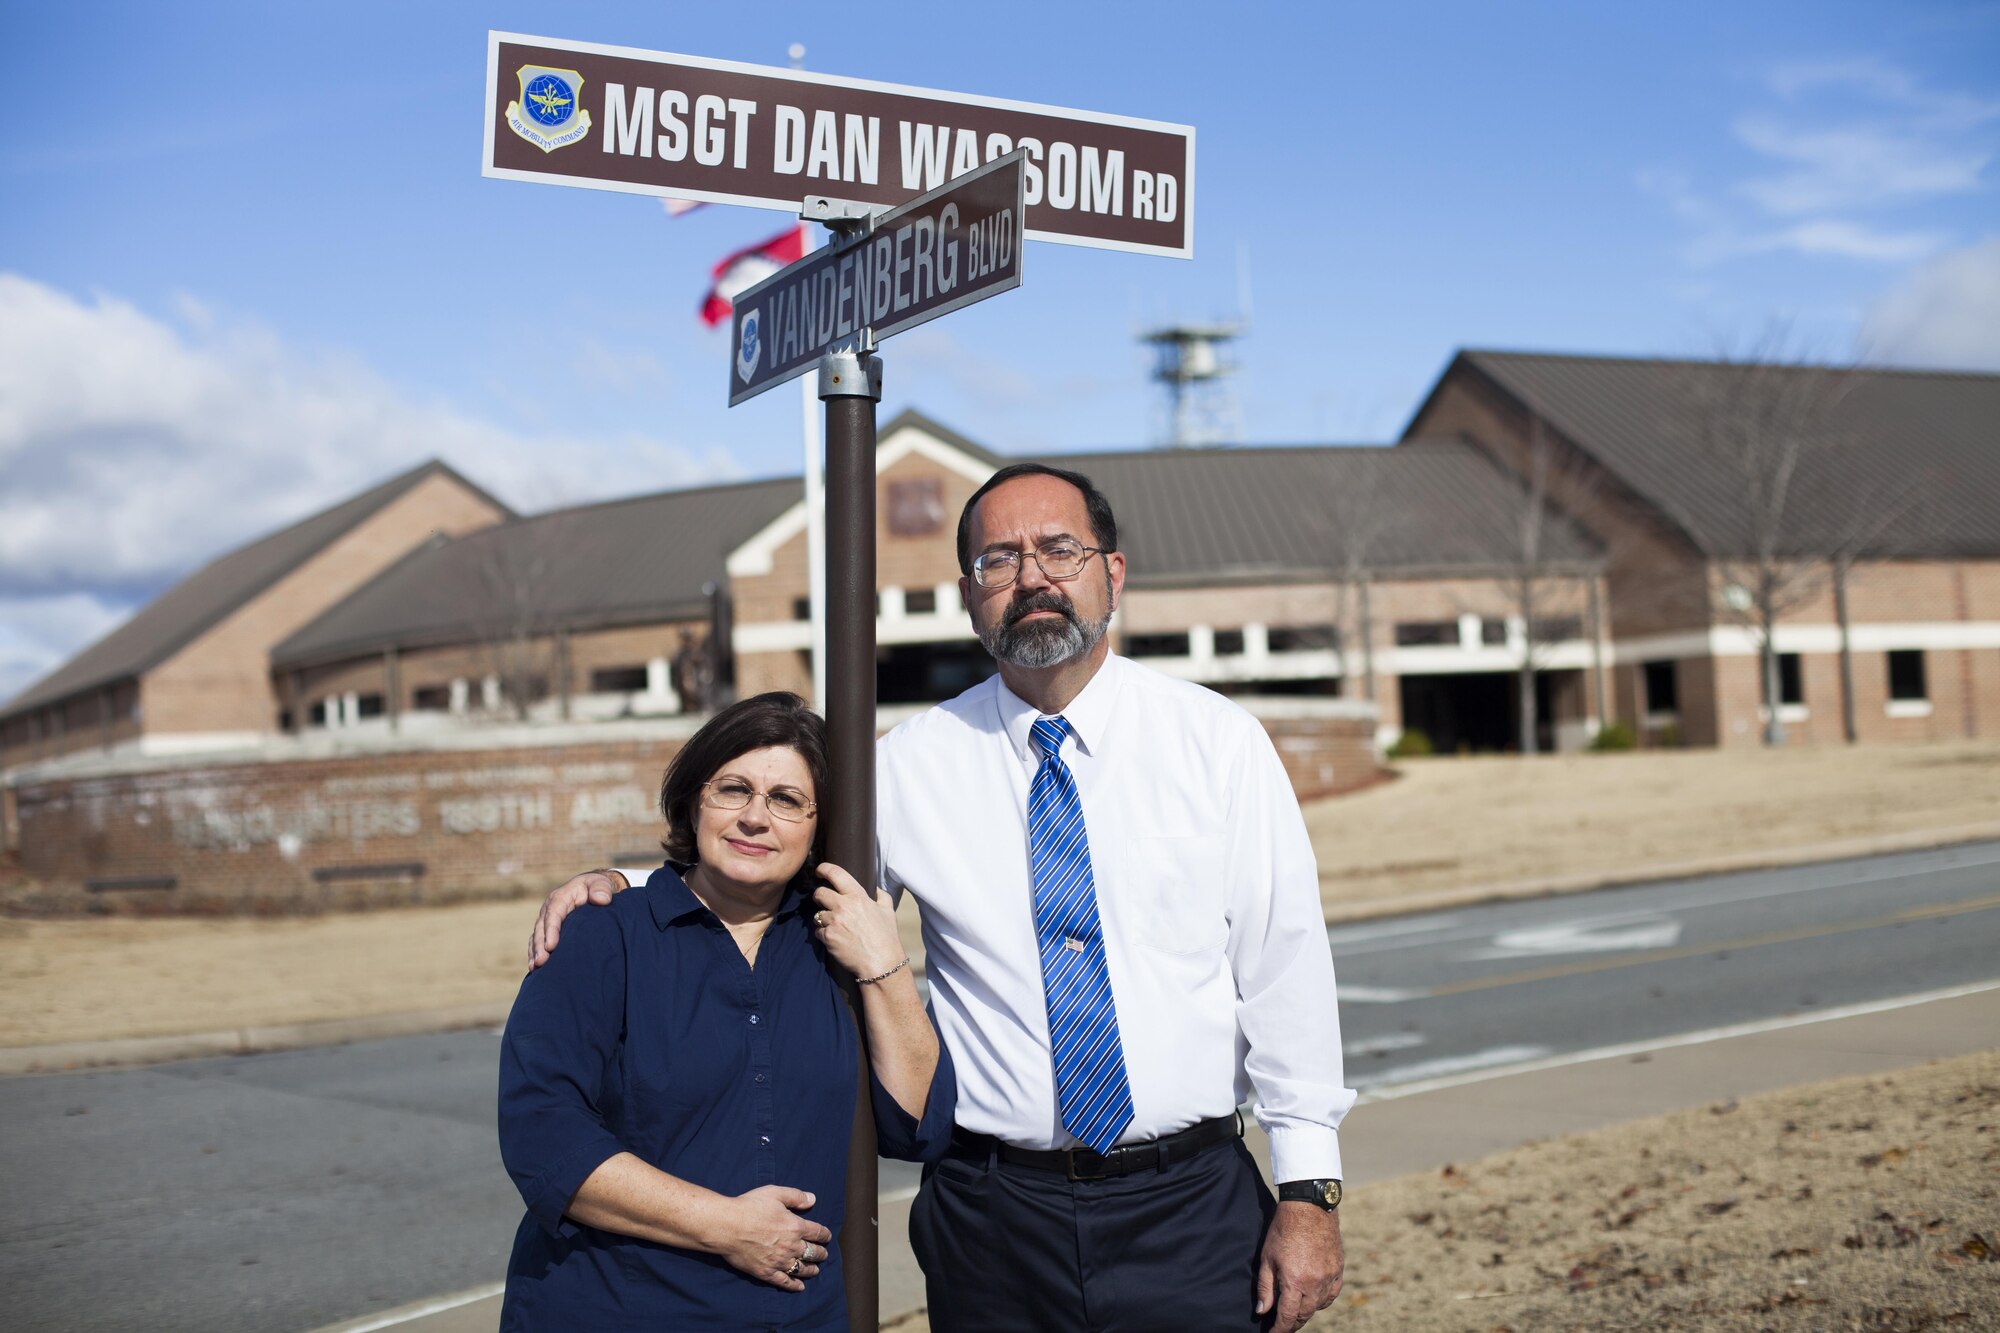 Dan Sr. and Pam Wassom stand at the newly designated “MSgt. Dan Wassom Road” at Little Rock AFB, Ark., Dec. 6. The road was named in honor of their son, Master Sgt. Daniel R. Wassom II, or “Bud” as he was called by family and friends. Wassom, a loadmaster evaluator with the 189th Airlift Wing at Little Rock, died April 27 while trying to protect his daughter from a tornado that struck their home in Vilonia, Ark. (U.S. Air Force photo by Senior Airman Ian Caple/Released)